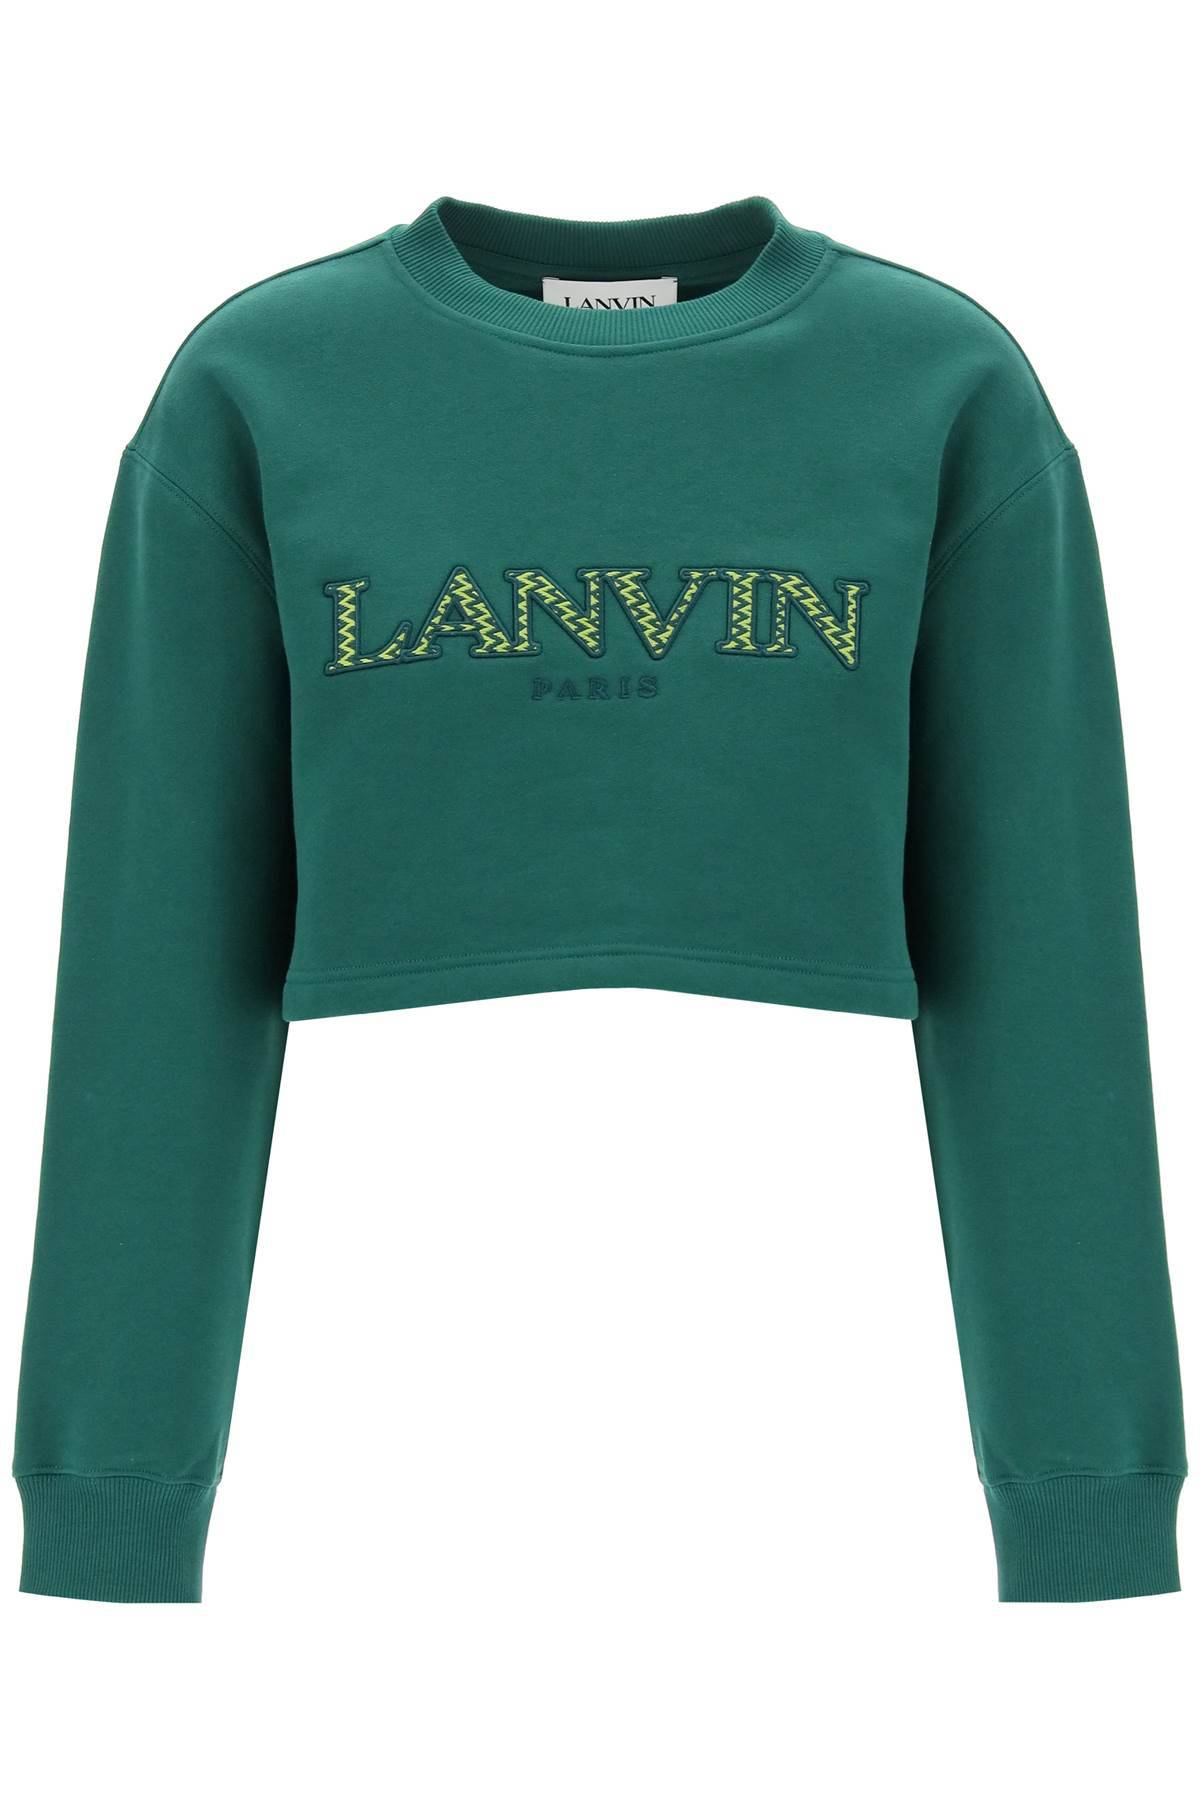 Lanvin LANVIN cropped sweatshirt with embroidered logo patch